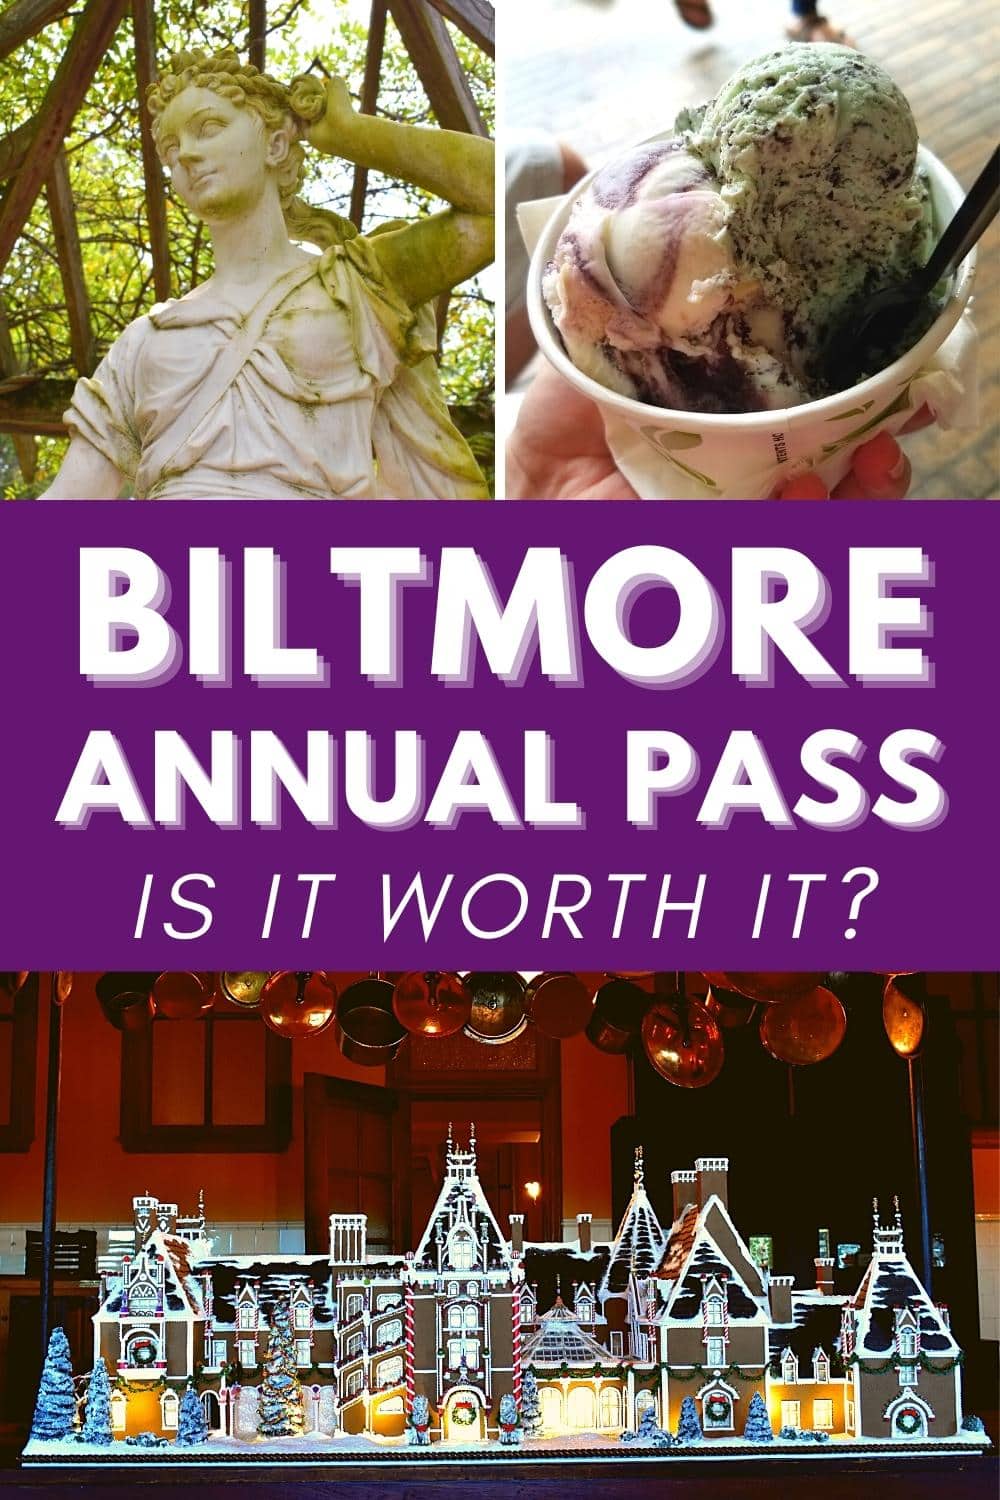 Is a Biltmore Annual Pass Worth It? (Benefits + Cost Comparison)